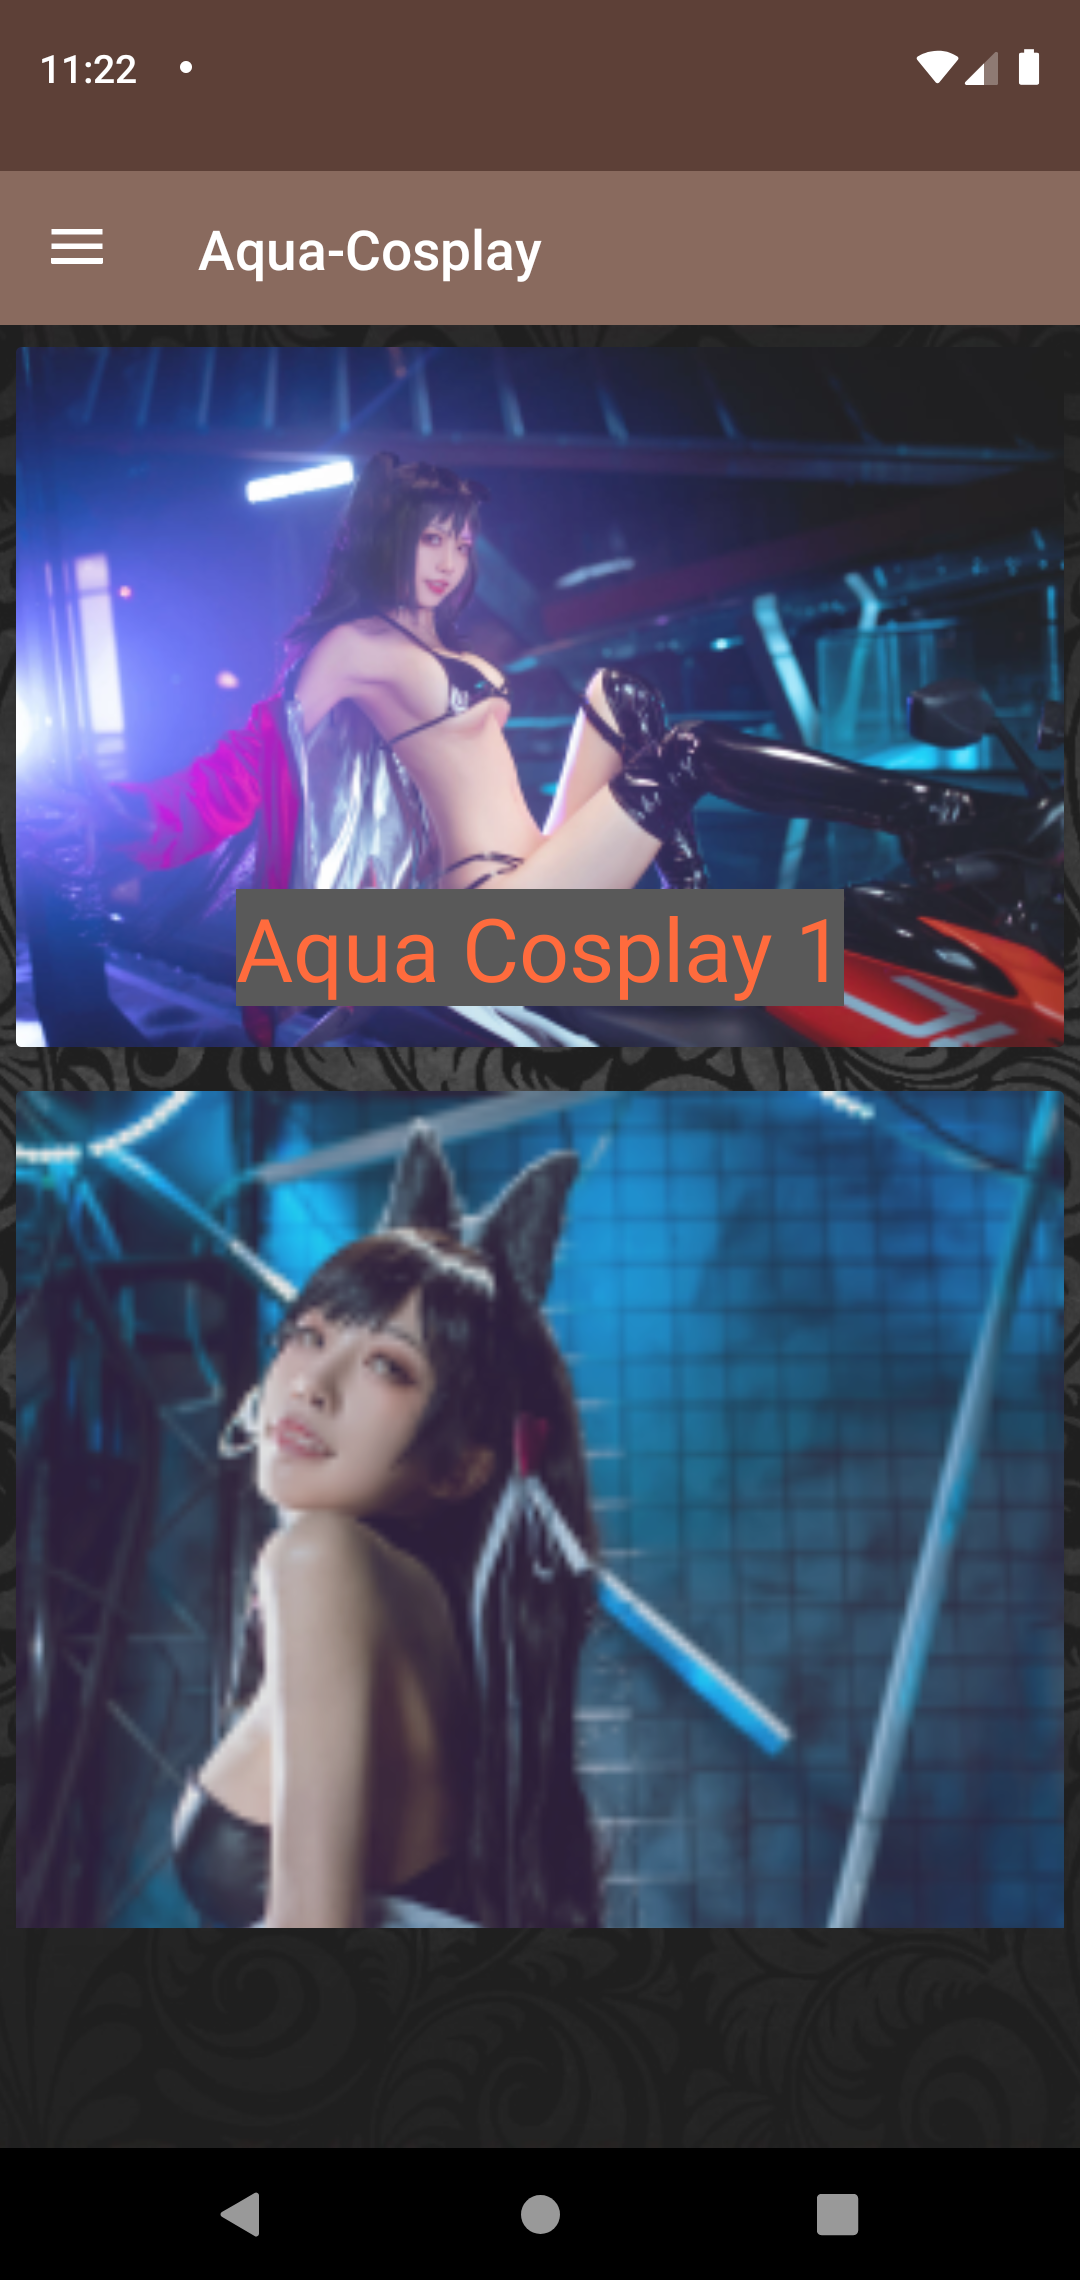 Aqua Cosplay offline,apk,hentai,photos,cosplay,apps,pornstar,ecchi,the,gallery,collection,phone,finder,images,picture,baixar,best,image,app,gay,download,pictures,pics